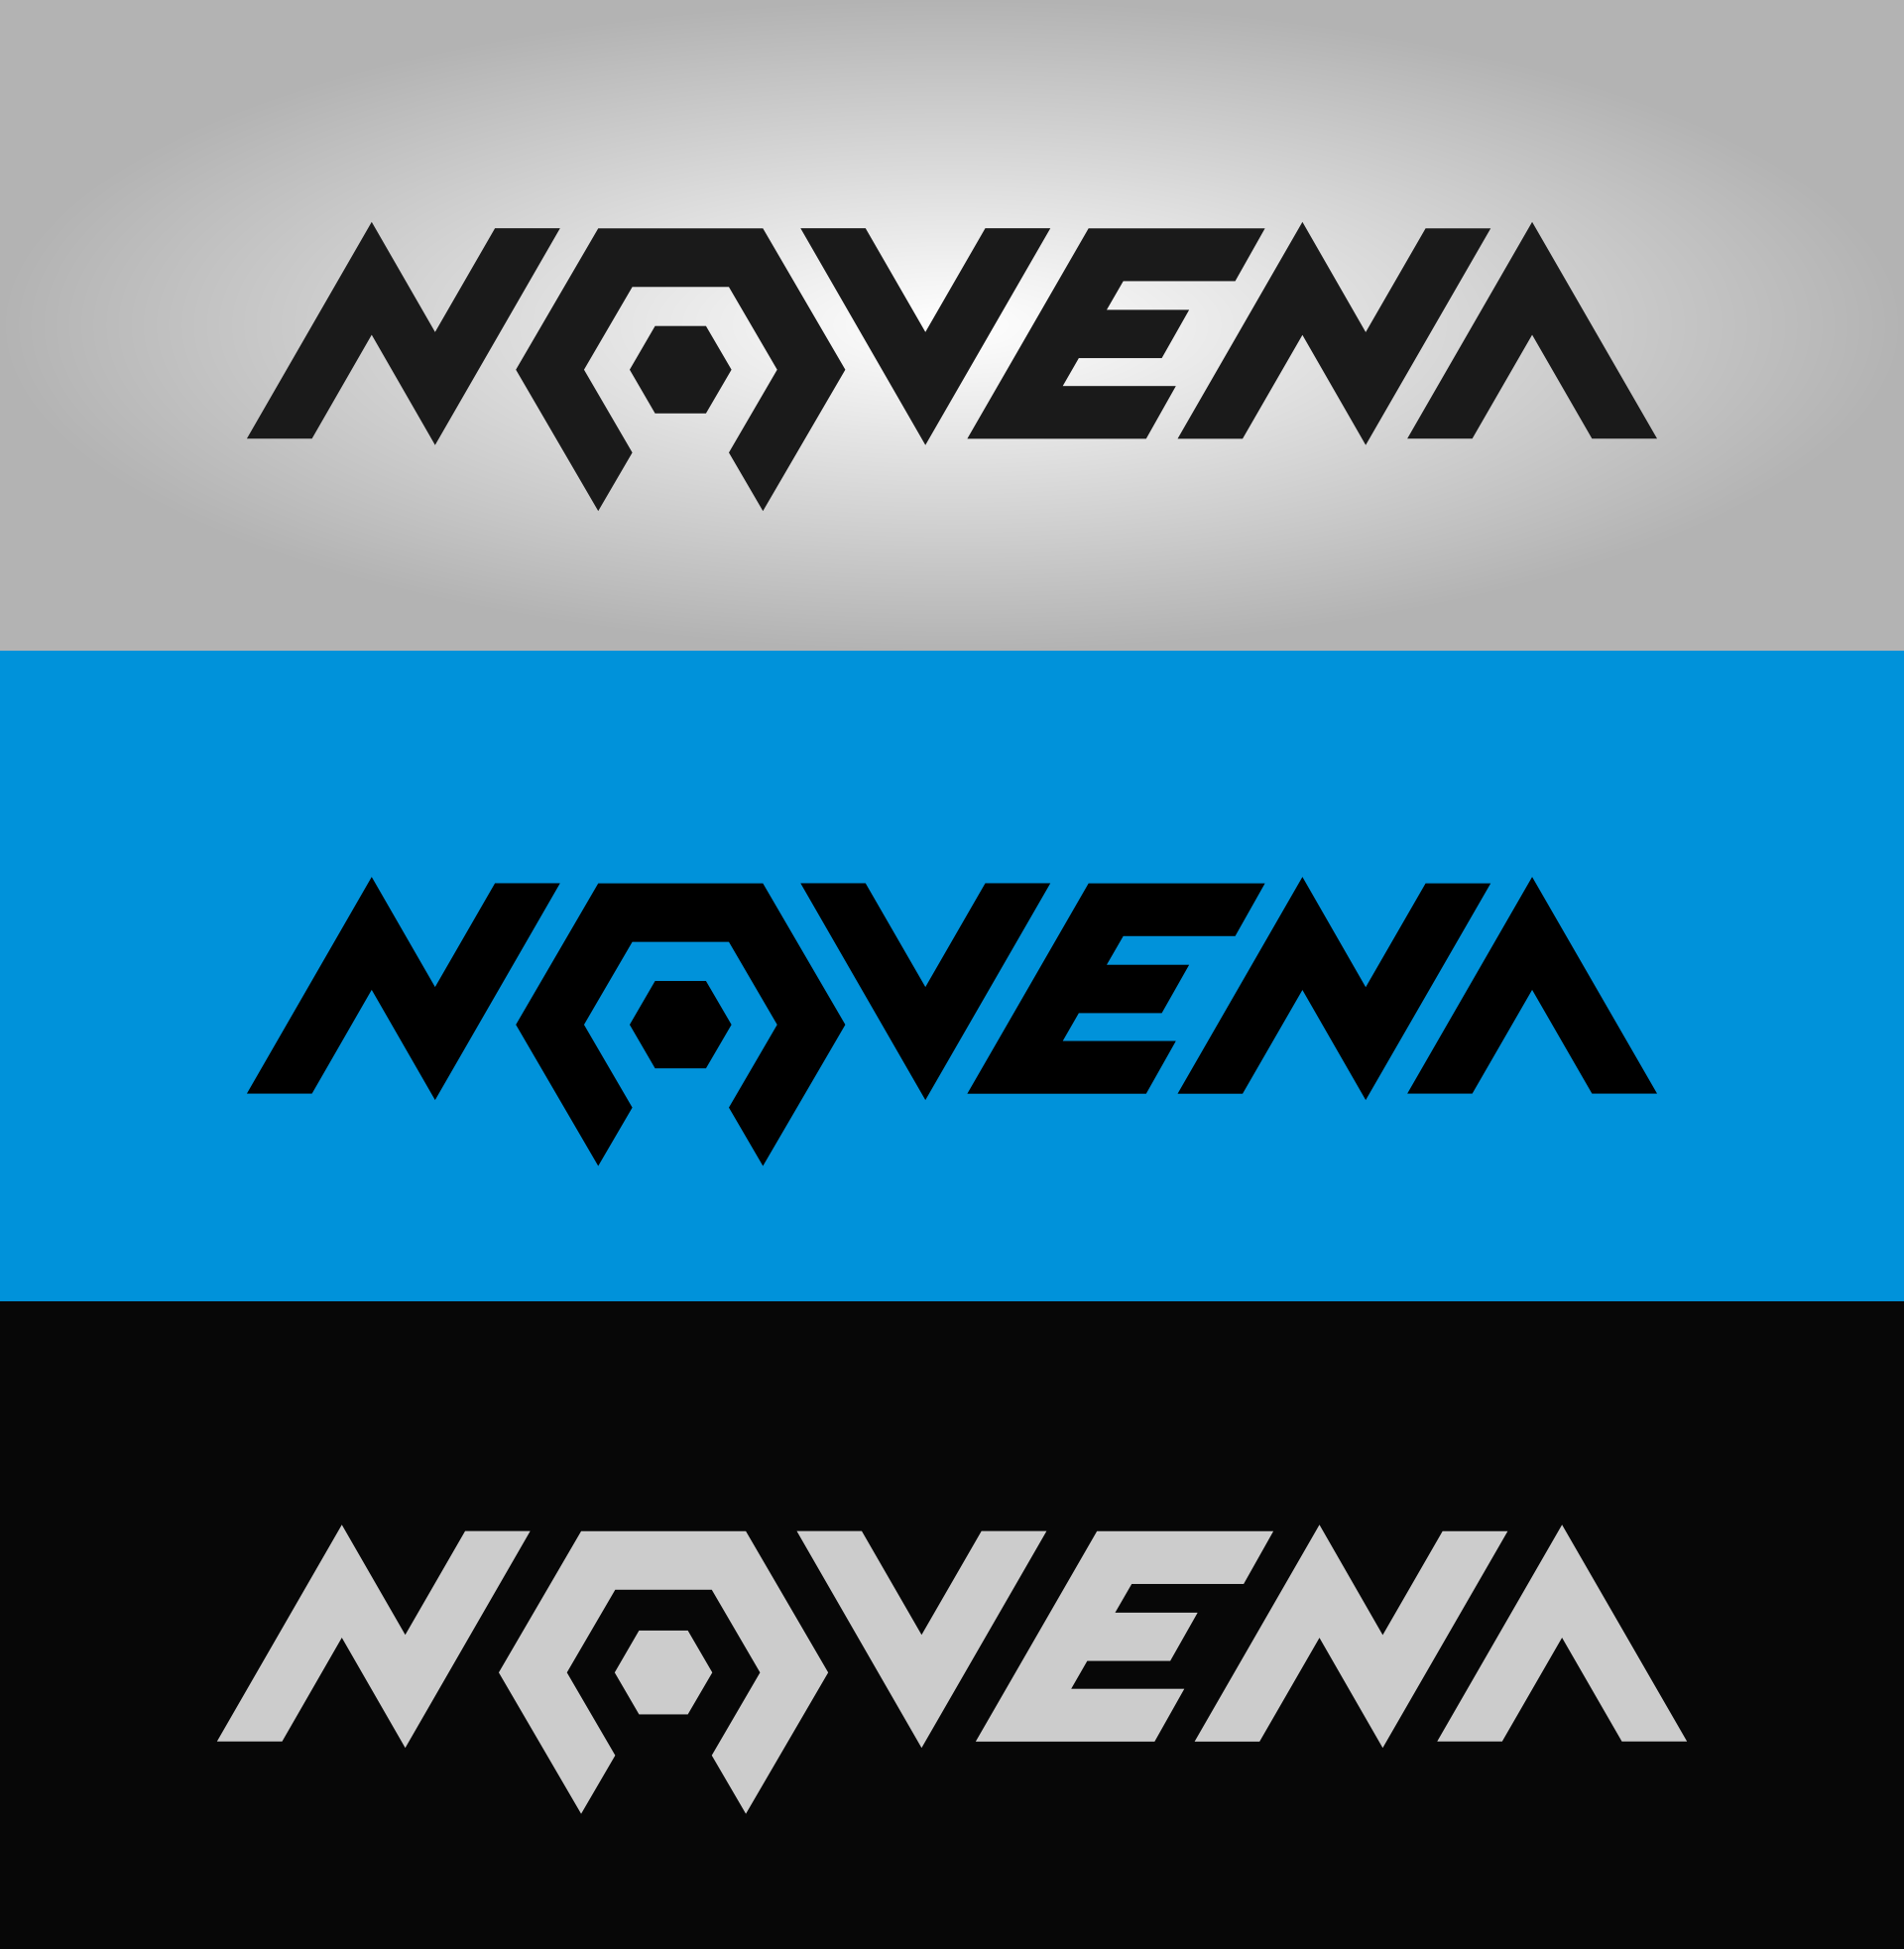 Novena logo on three different backgrounds